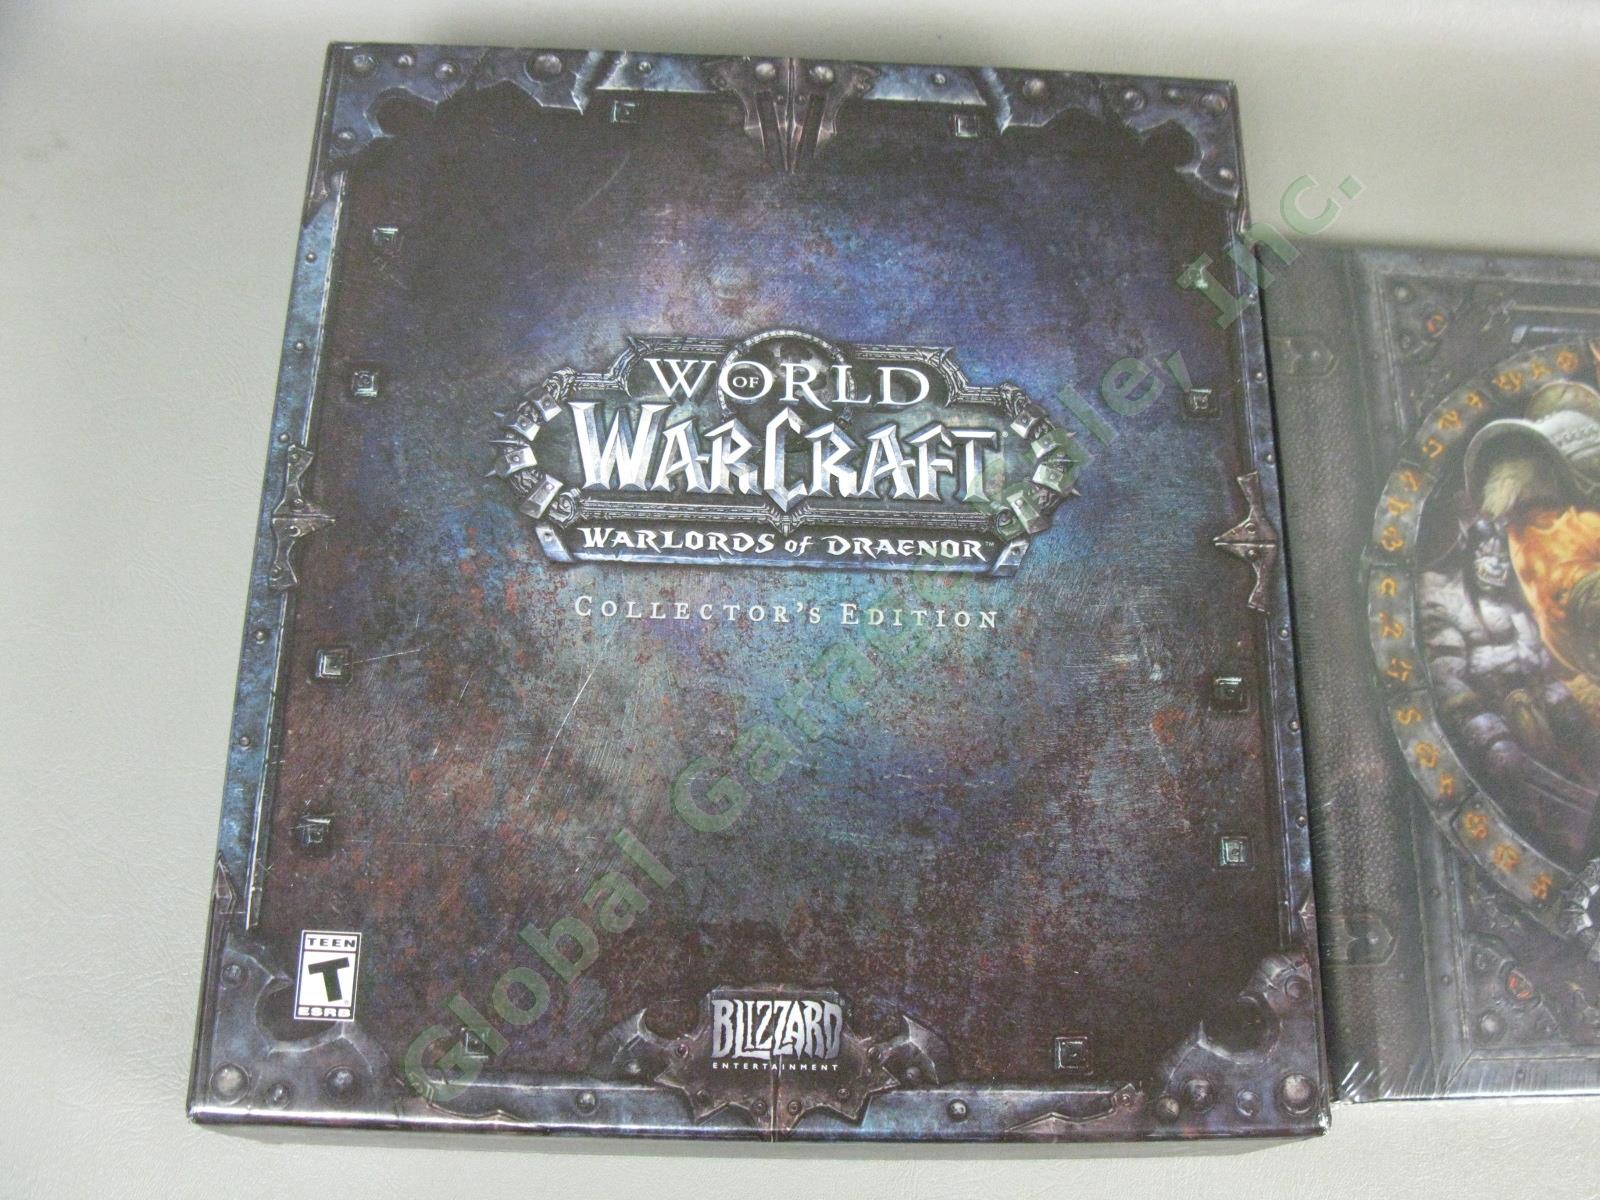 World Of Warcraft Warlords Of Draenor Collectors Edition Sealed Book CD DVD NR! 1